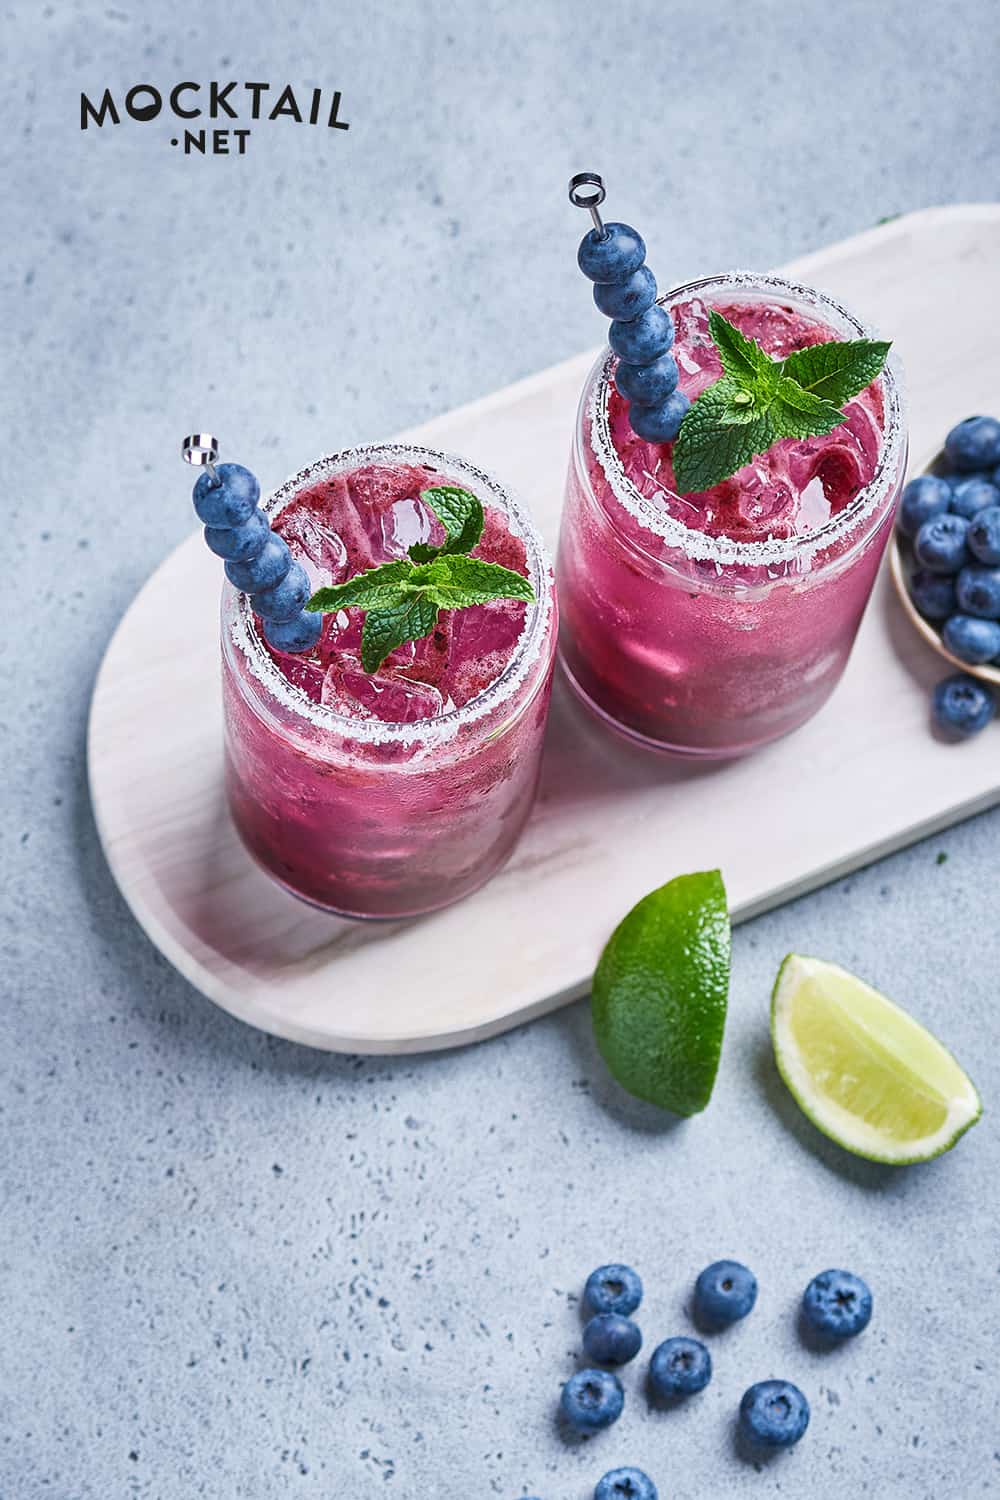 How to Make a Blueberry Mojito Mocktail